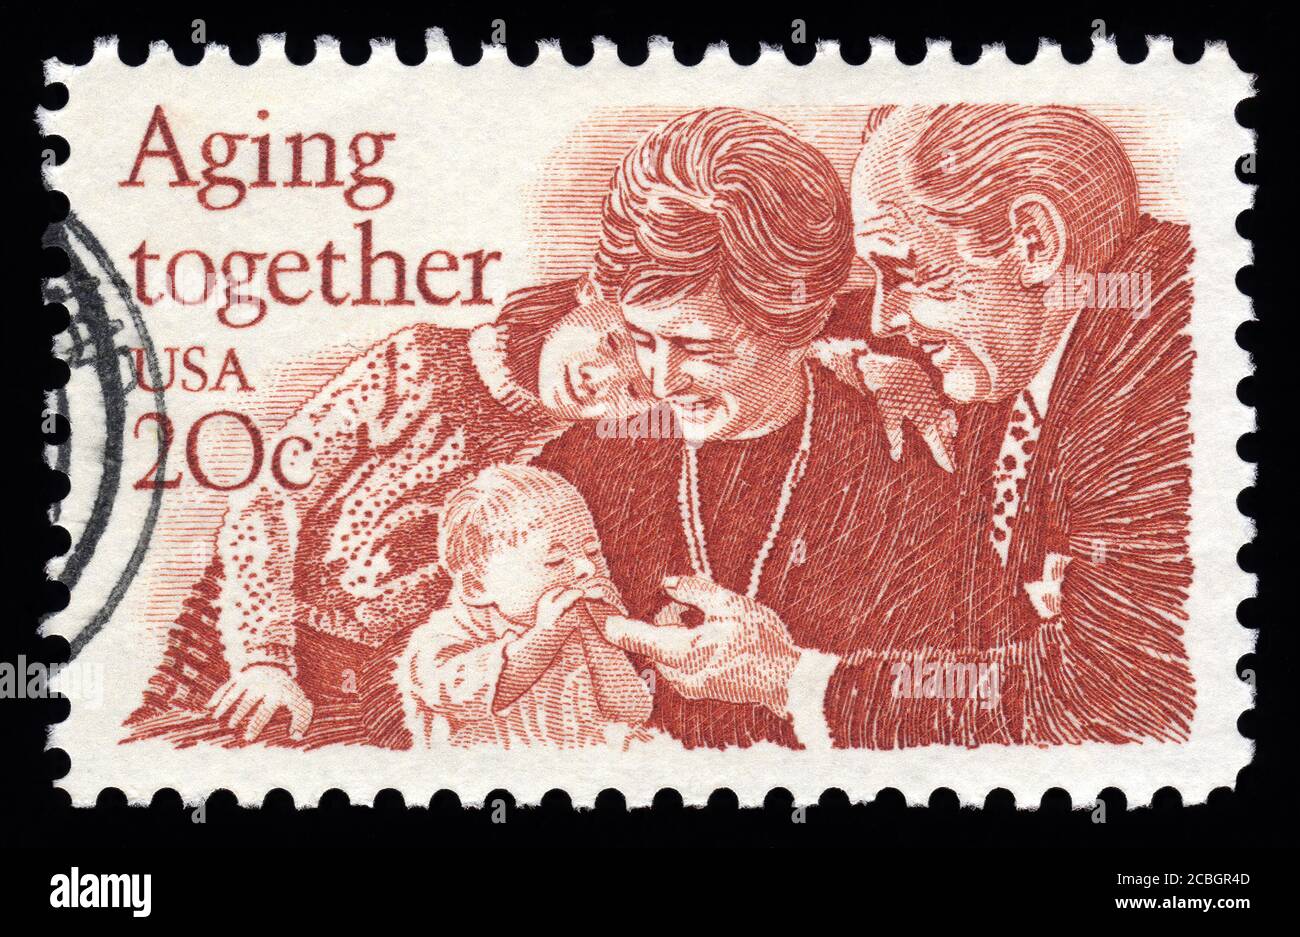 London, UK, February 5 2011 - Vintage 1982 USA cancelled postage stamp showing an image of a family ageing together stamp collecting stock photo Stock Photo